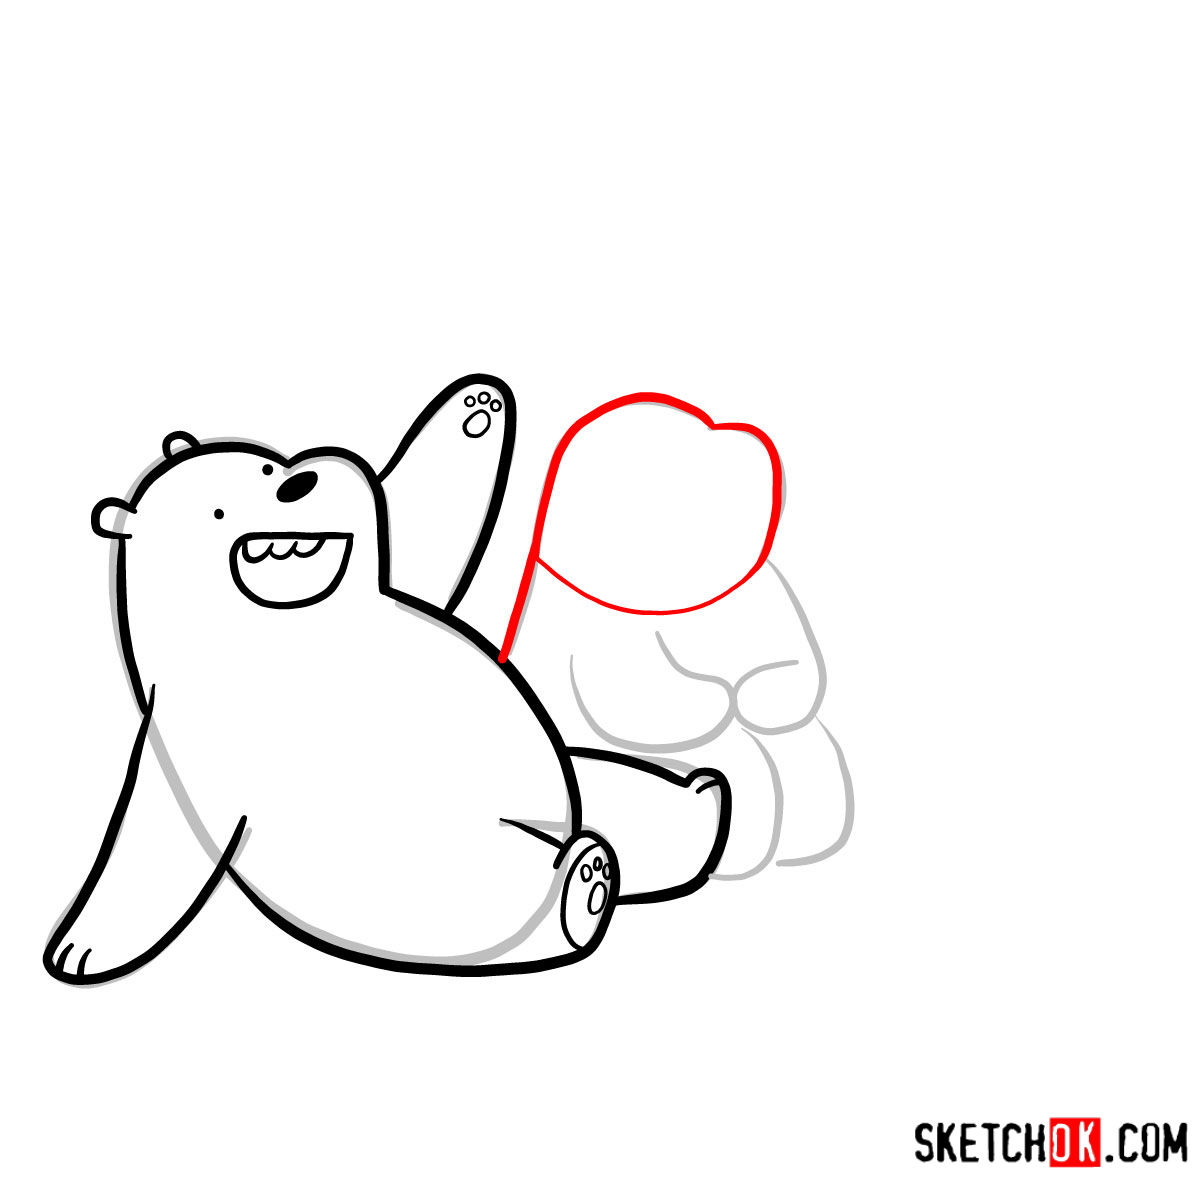 How to draw all three bears together | We Bare Bears - step 09